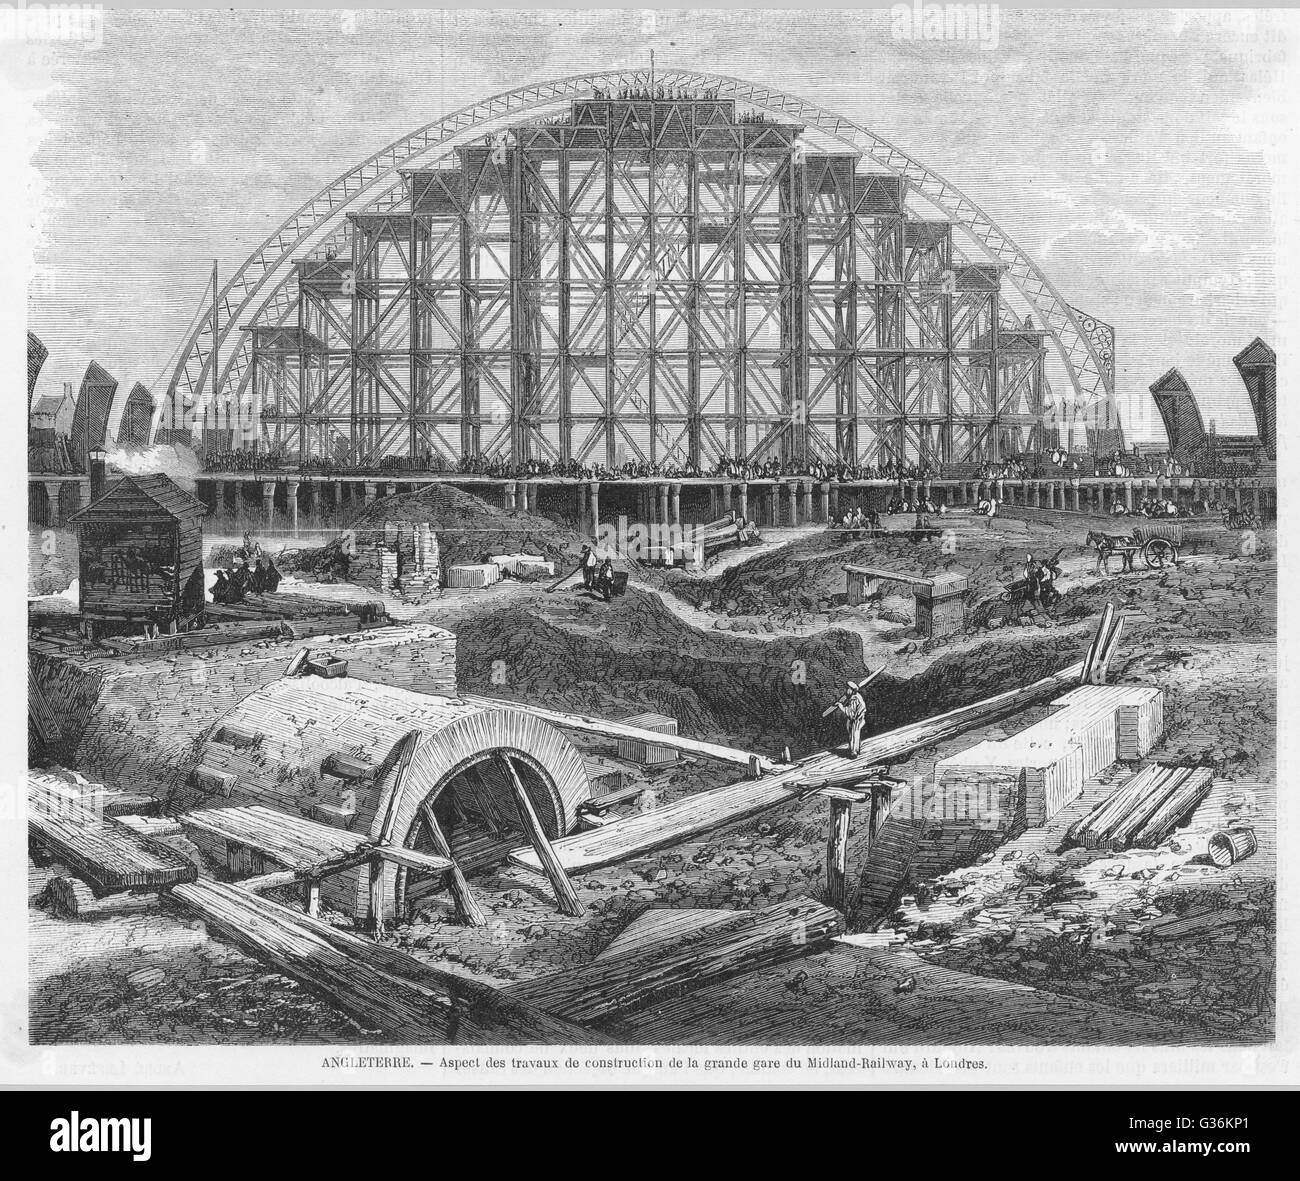 Construction of St. Pancras Station. The magnificent canopy of the  new Midland Railway terminus  takes shape near the Euston  Road.      Date: 1868 Stock Photo